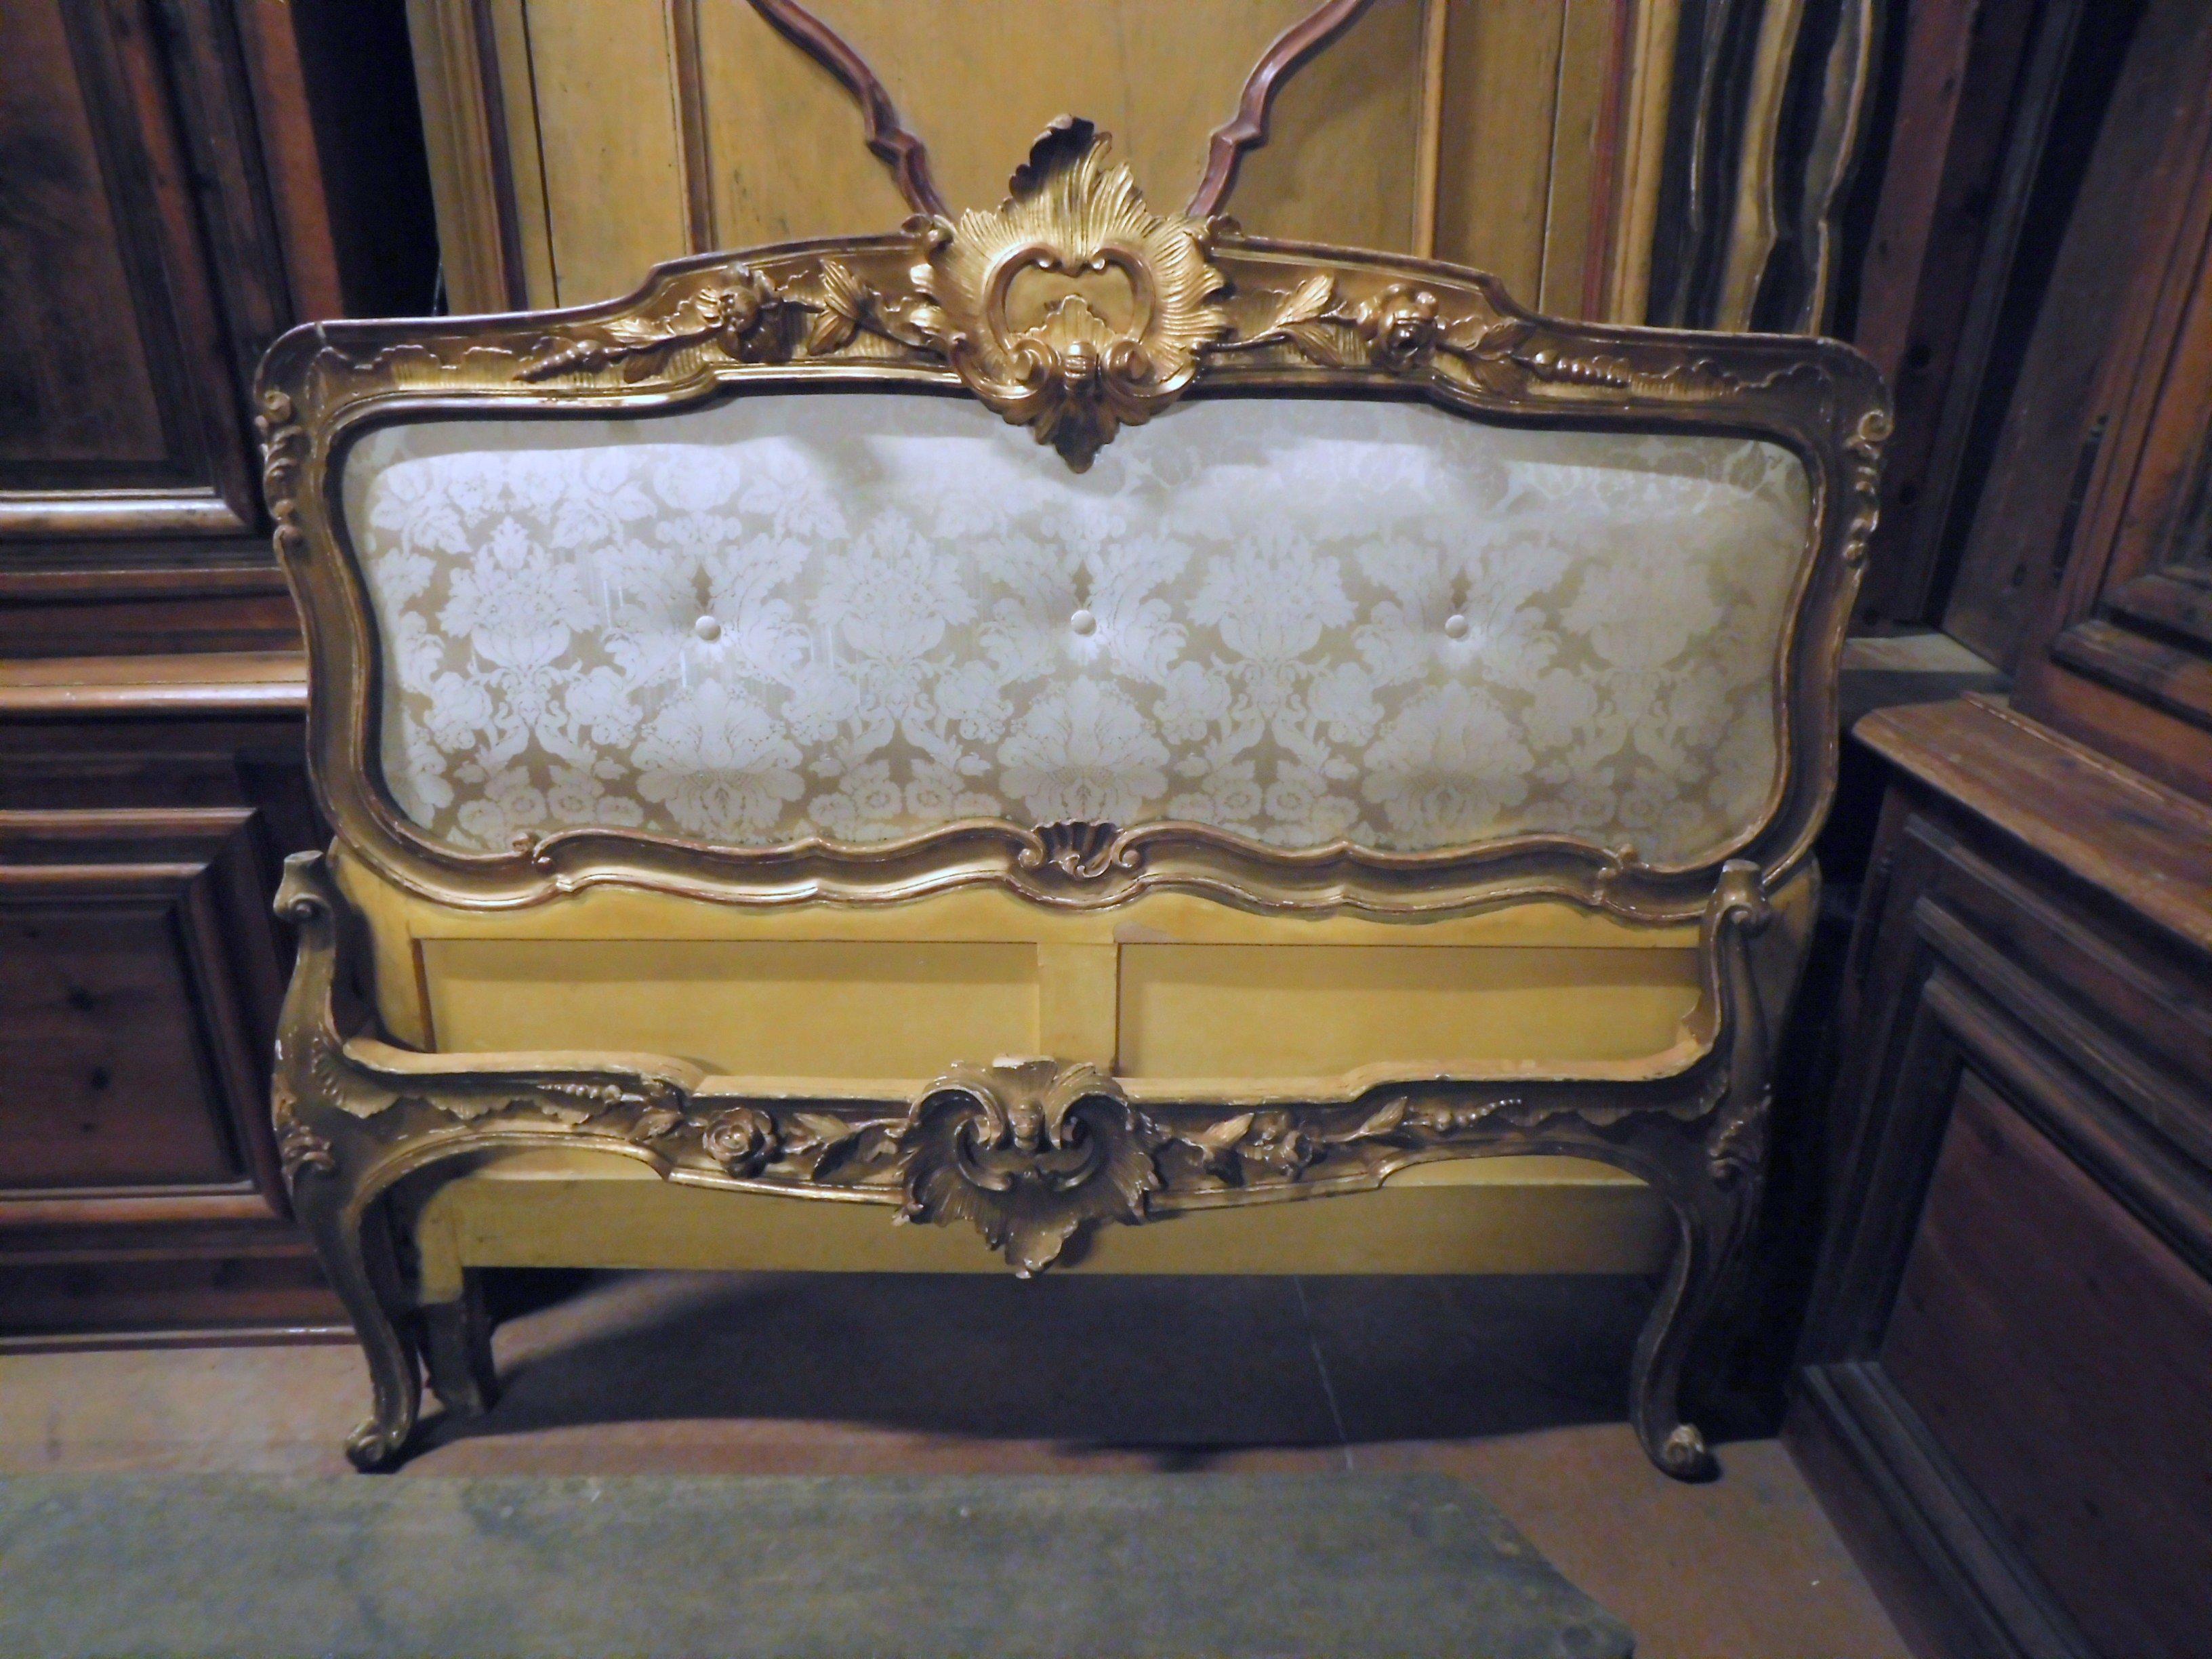 Late 19th Century 19th Century Antique Golden Bed with Damask Lined Headboard